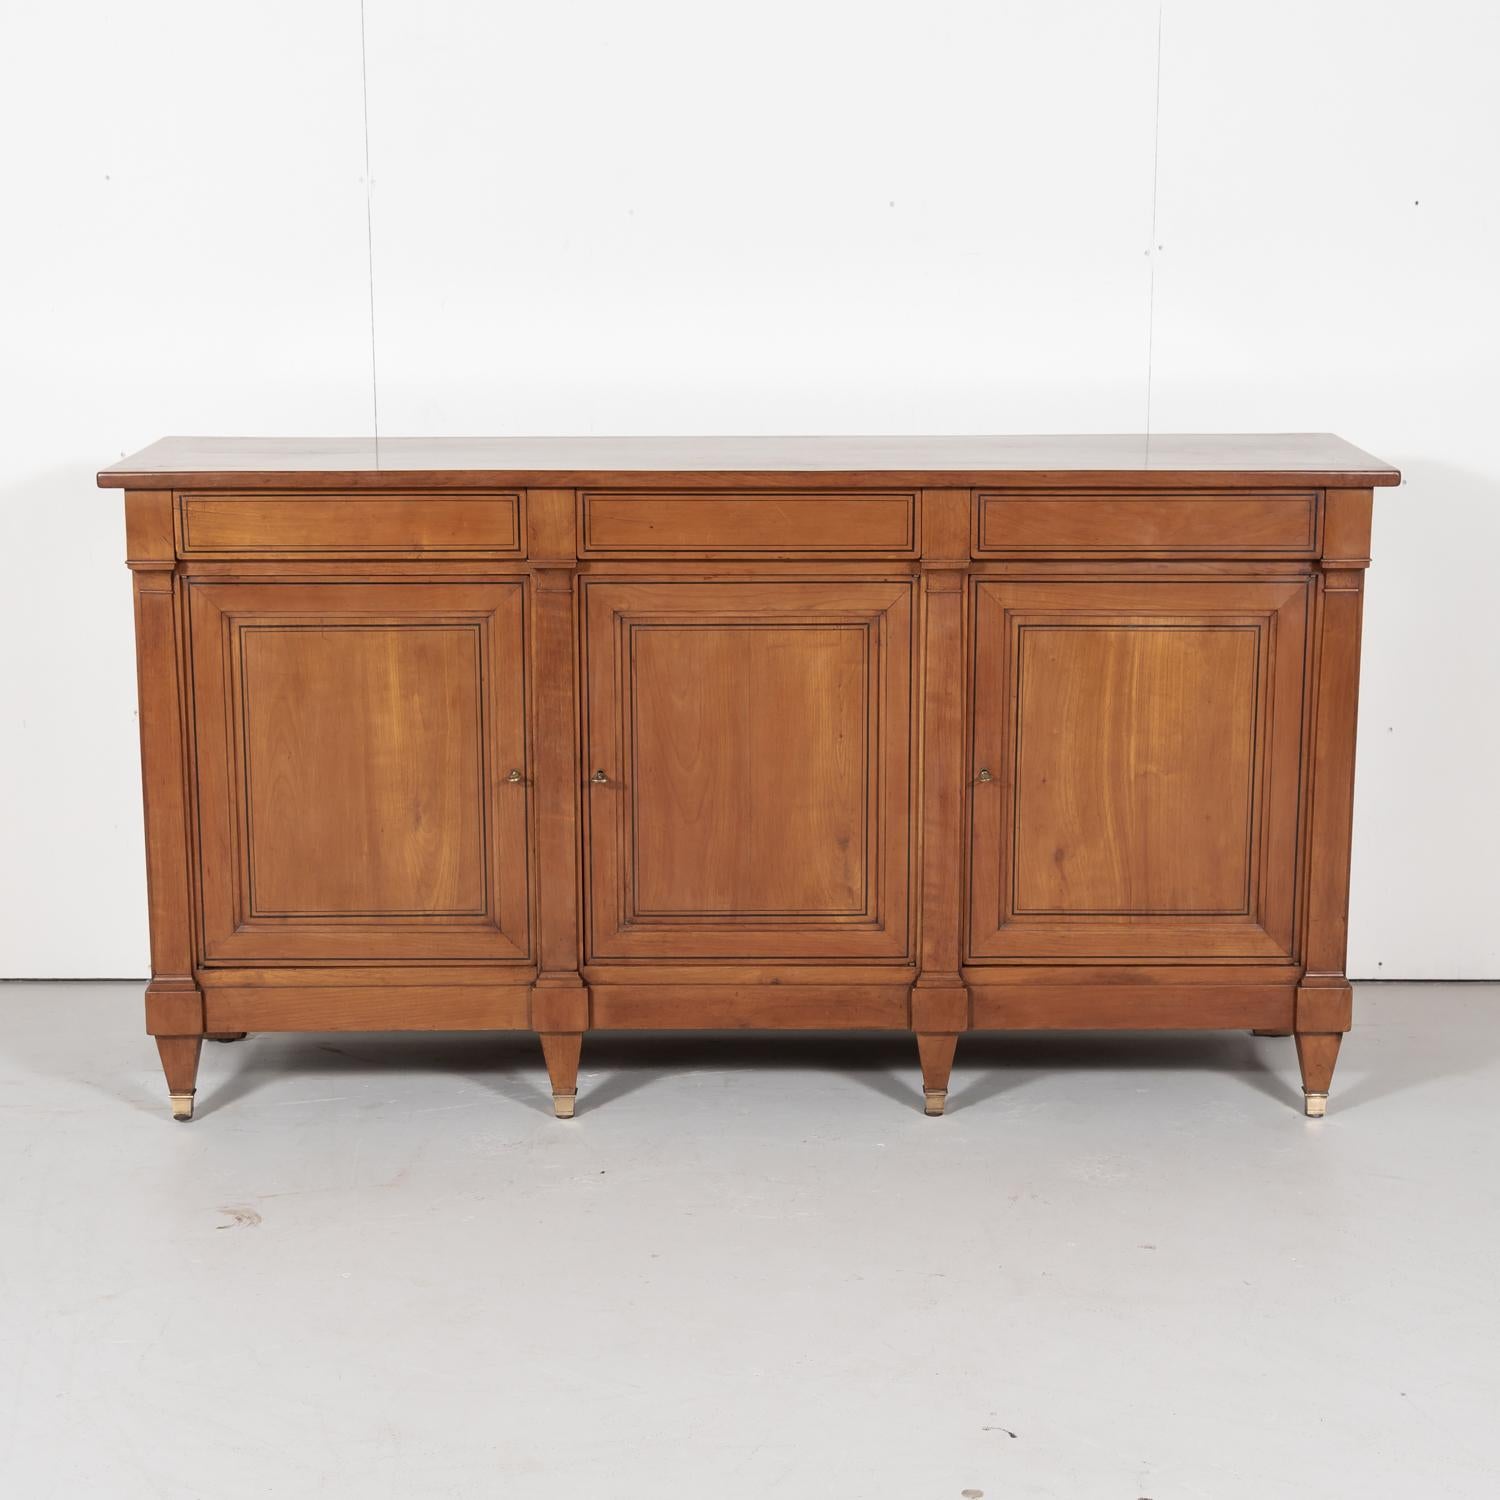 Handsome antique French Directoire style enfilade handcrafted in the Occitane region of cherrywood with ebony inlay, circa 1910s. Rectangular top above three drawers over three panel doors divided by pilasters. Raised on short tapered legs with